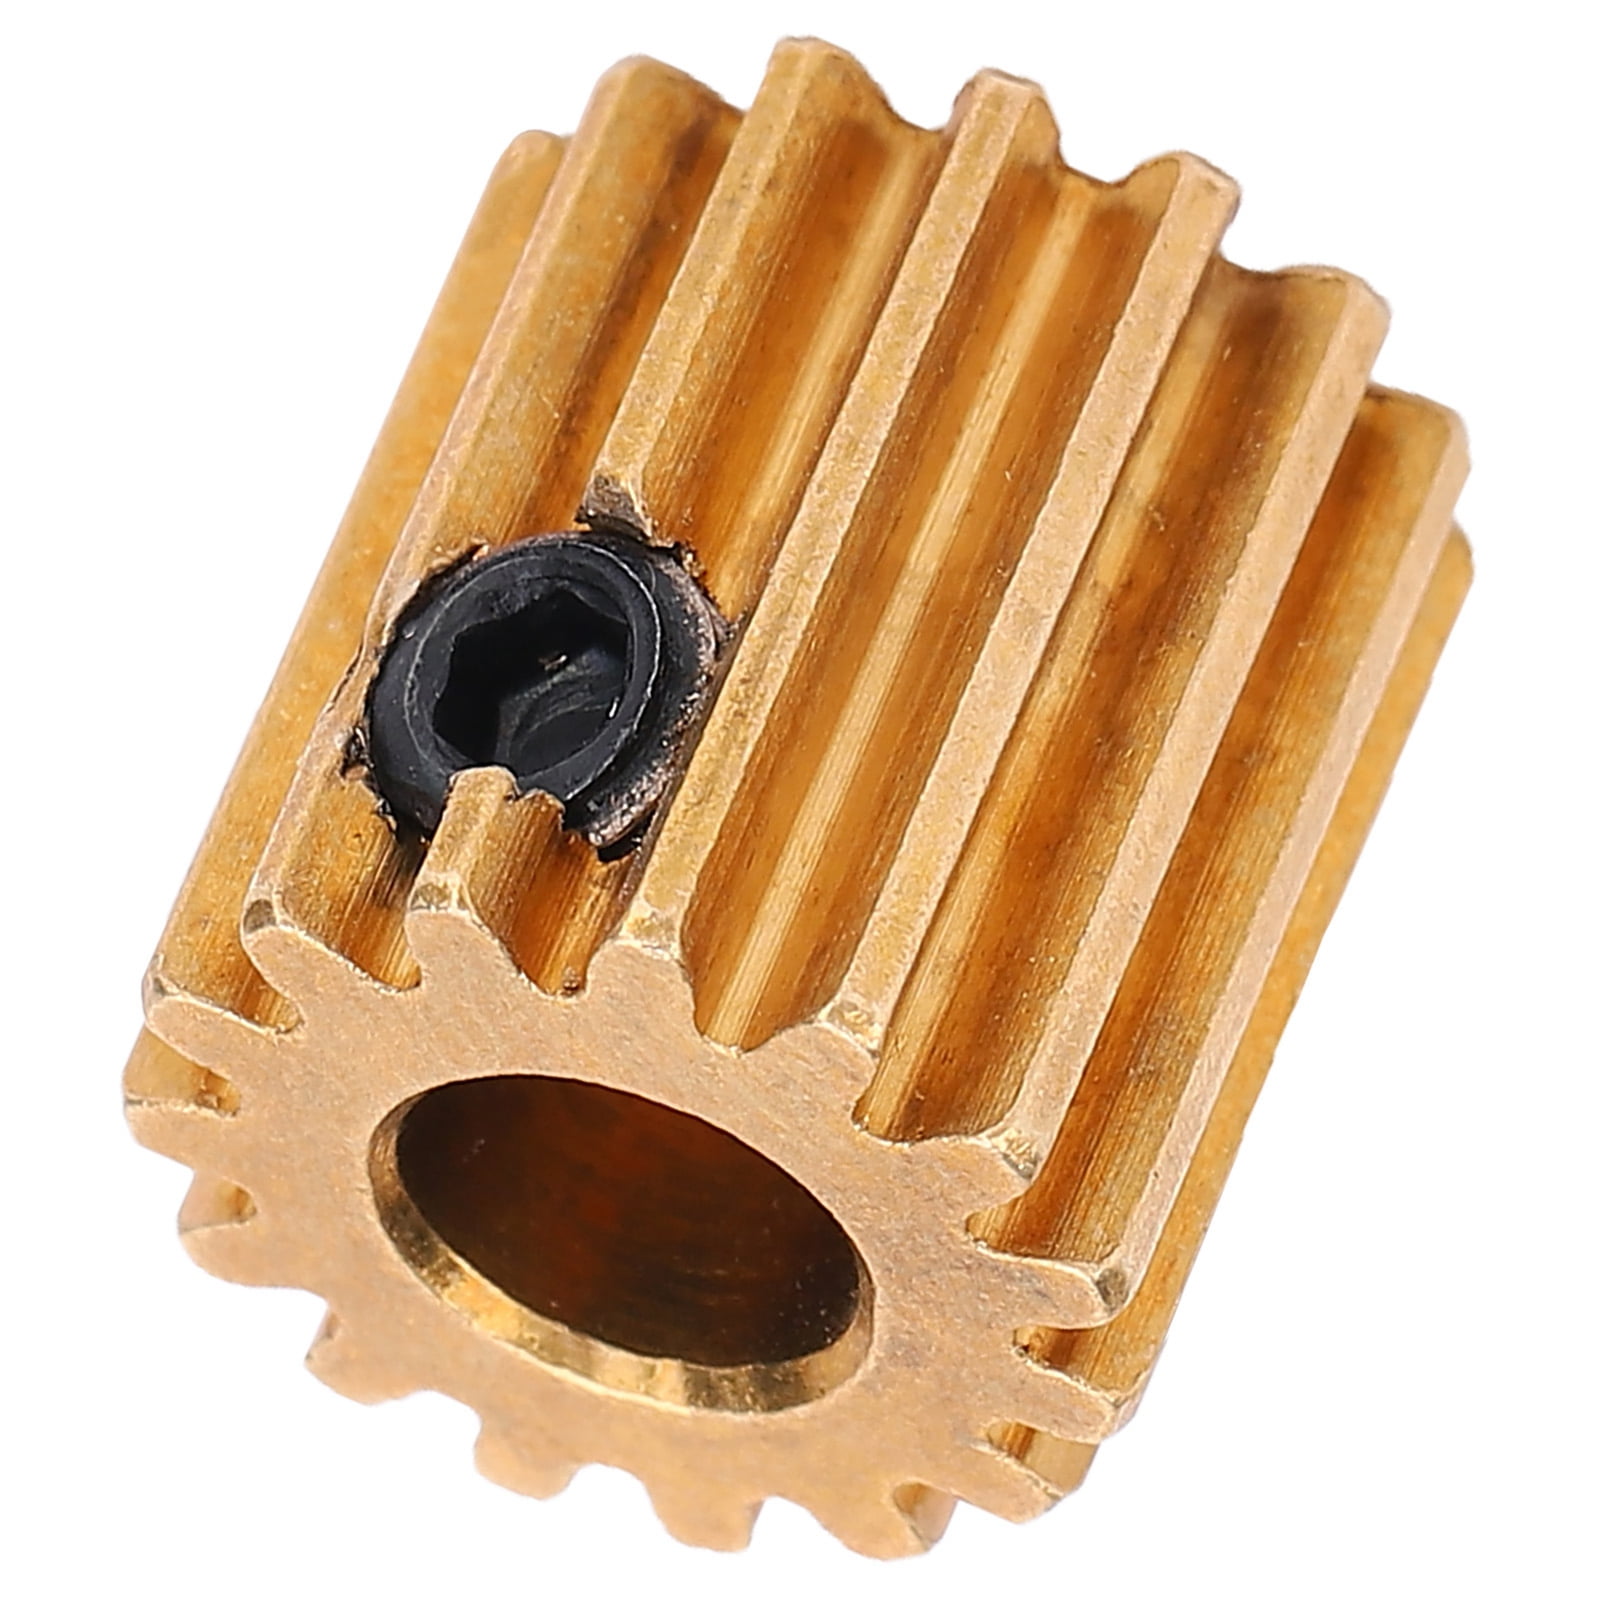 Details about   6mm Round Hole Modulus 0.8 15‑Teeth Gear Toothed Sprocket Industrial Robot Parts 